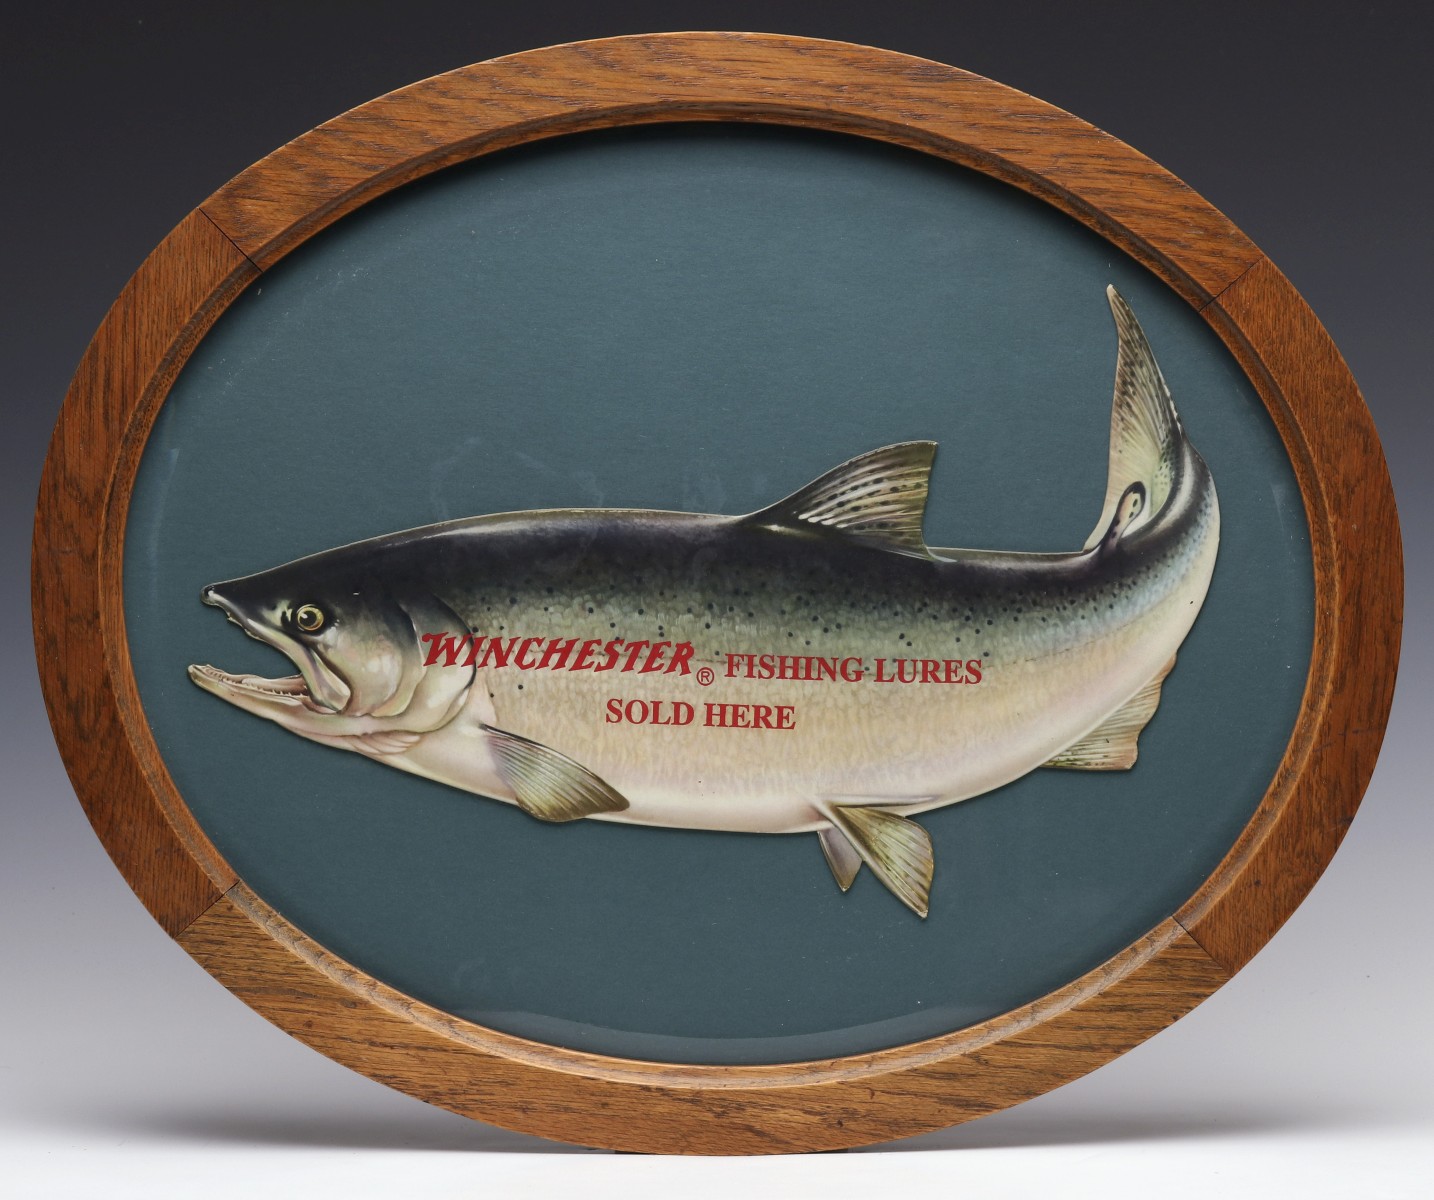 A GOOD WINCHESTER FISHING LURES DIE-CUT ADVERTISING SIGN